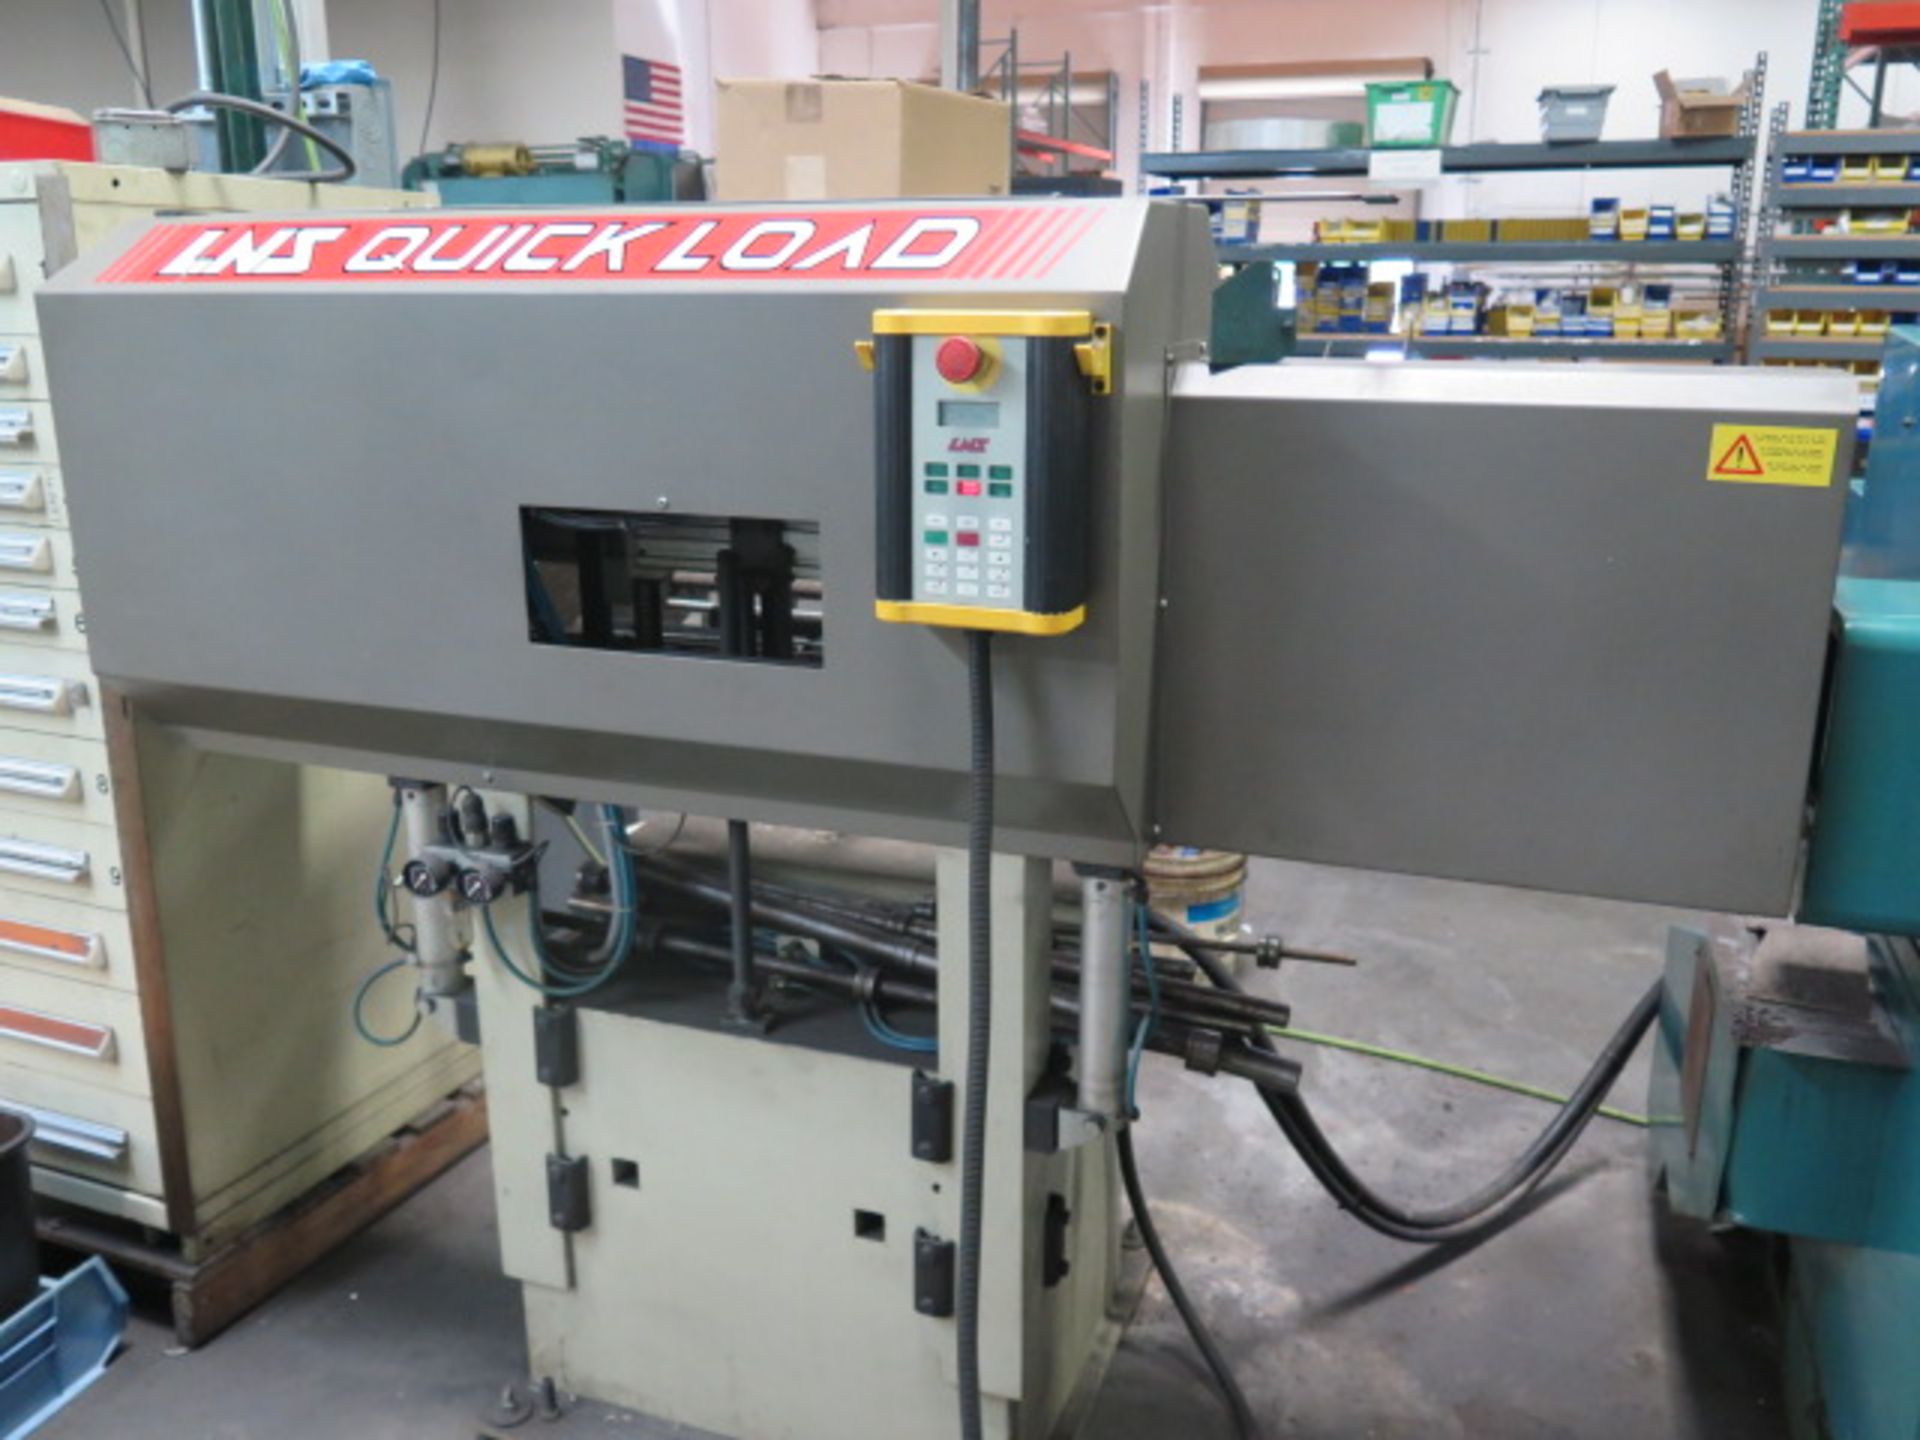 Nakamura Tome Methods Slant 1 CNC Turning Center s/n C24610 w/ Fanuc 11T, SOLD AS IS, LIVERMORE CA - Image 10 of 13